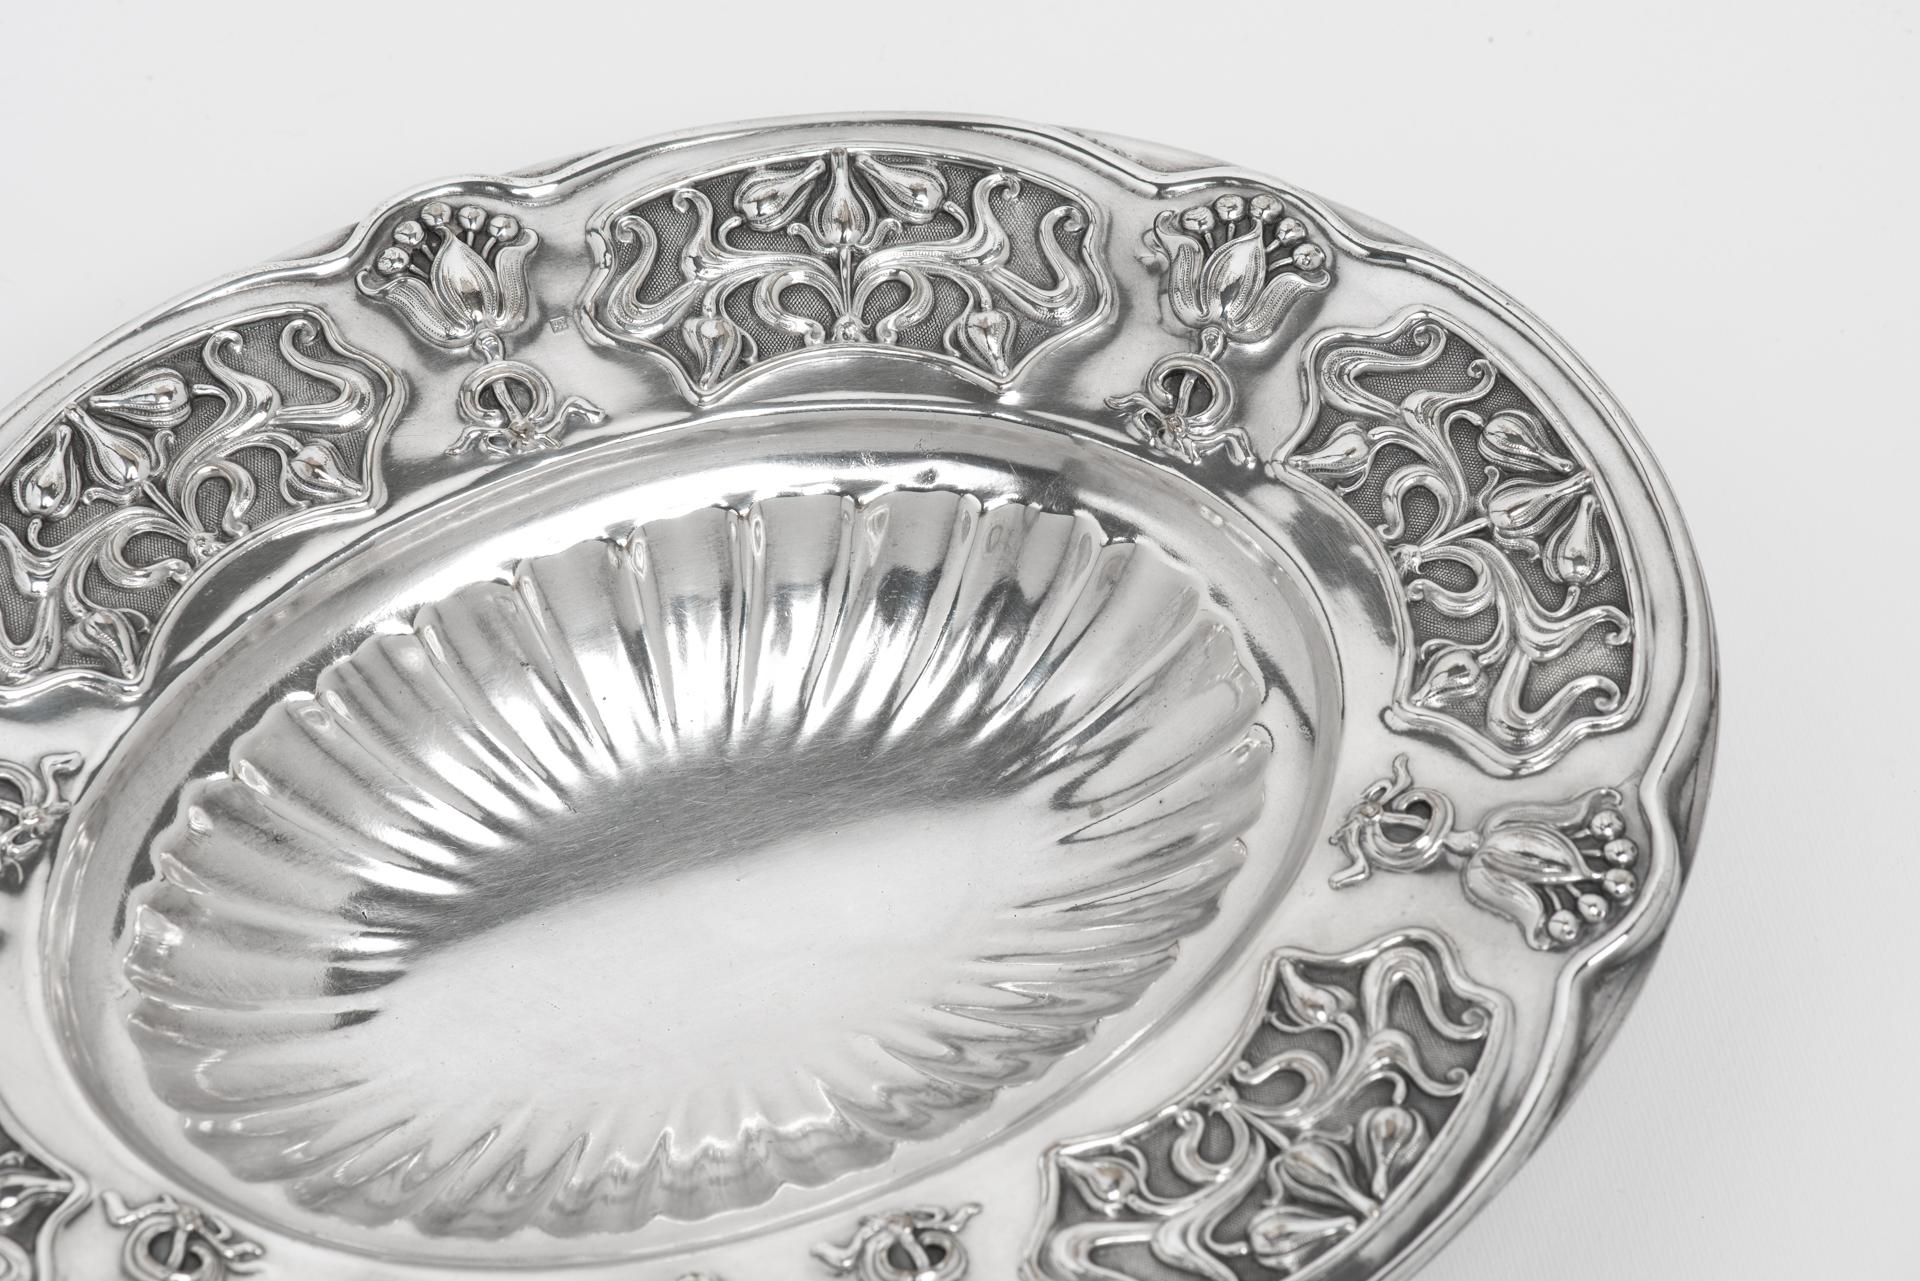 English Liberty Oval Centerpiece in Silver Plate For Sale